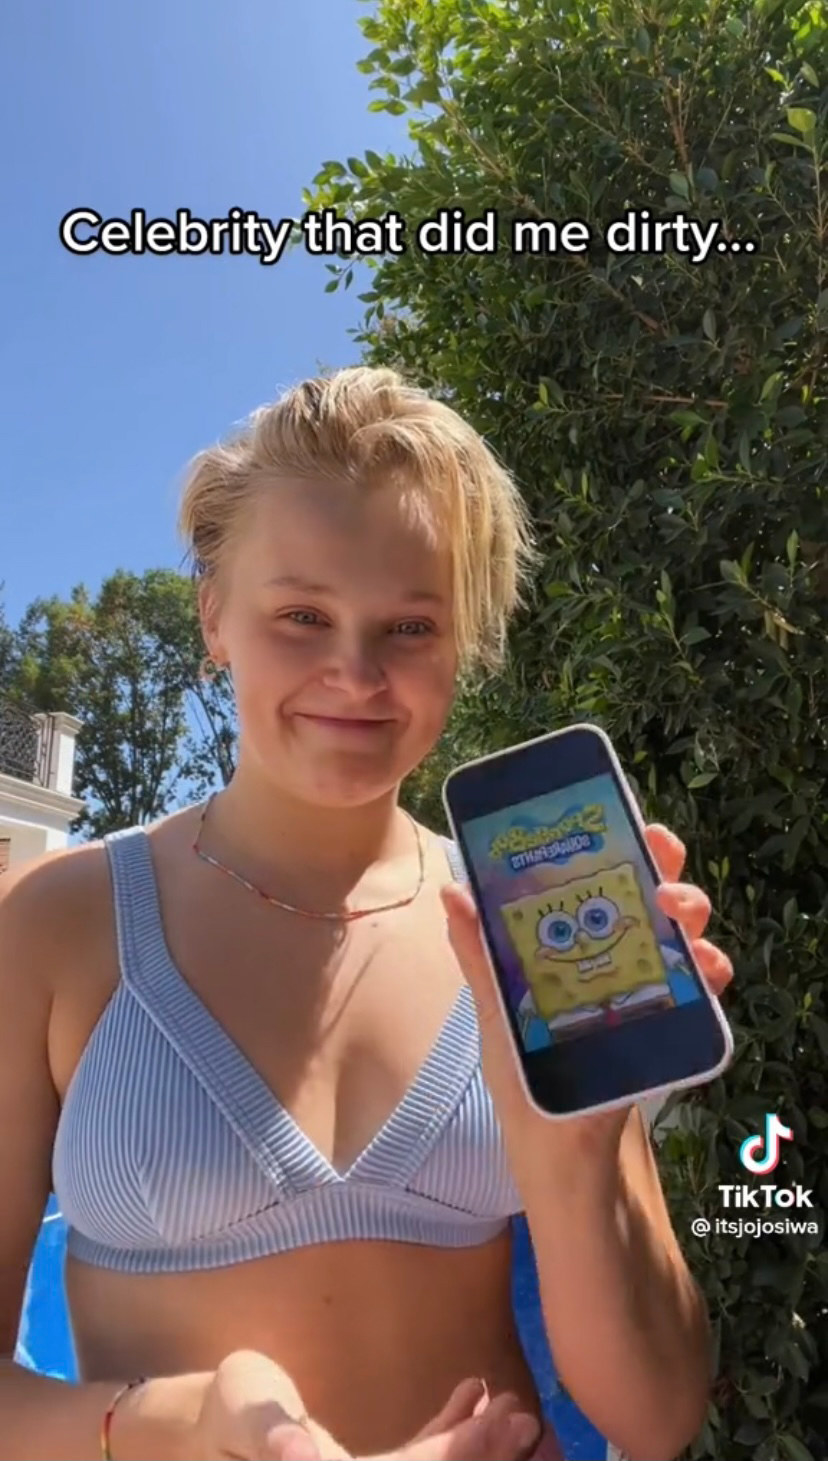 JoJo holds up her phone with a photo of SpongeBob